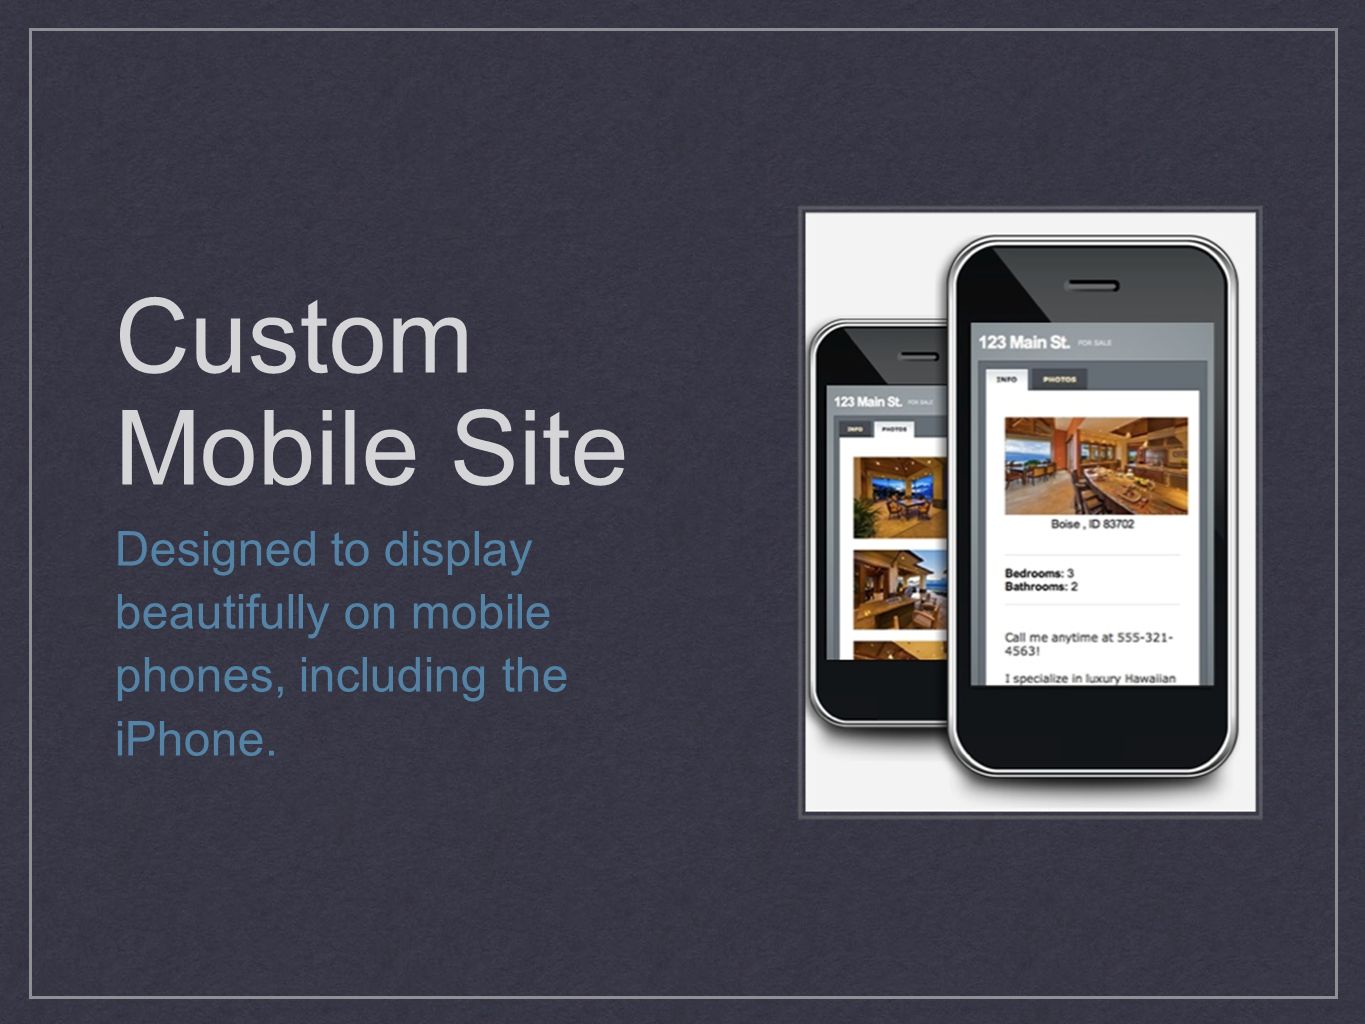 Custom Mobile Site Designed to display beautifully on mobile phones, including the iPhone.